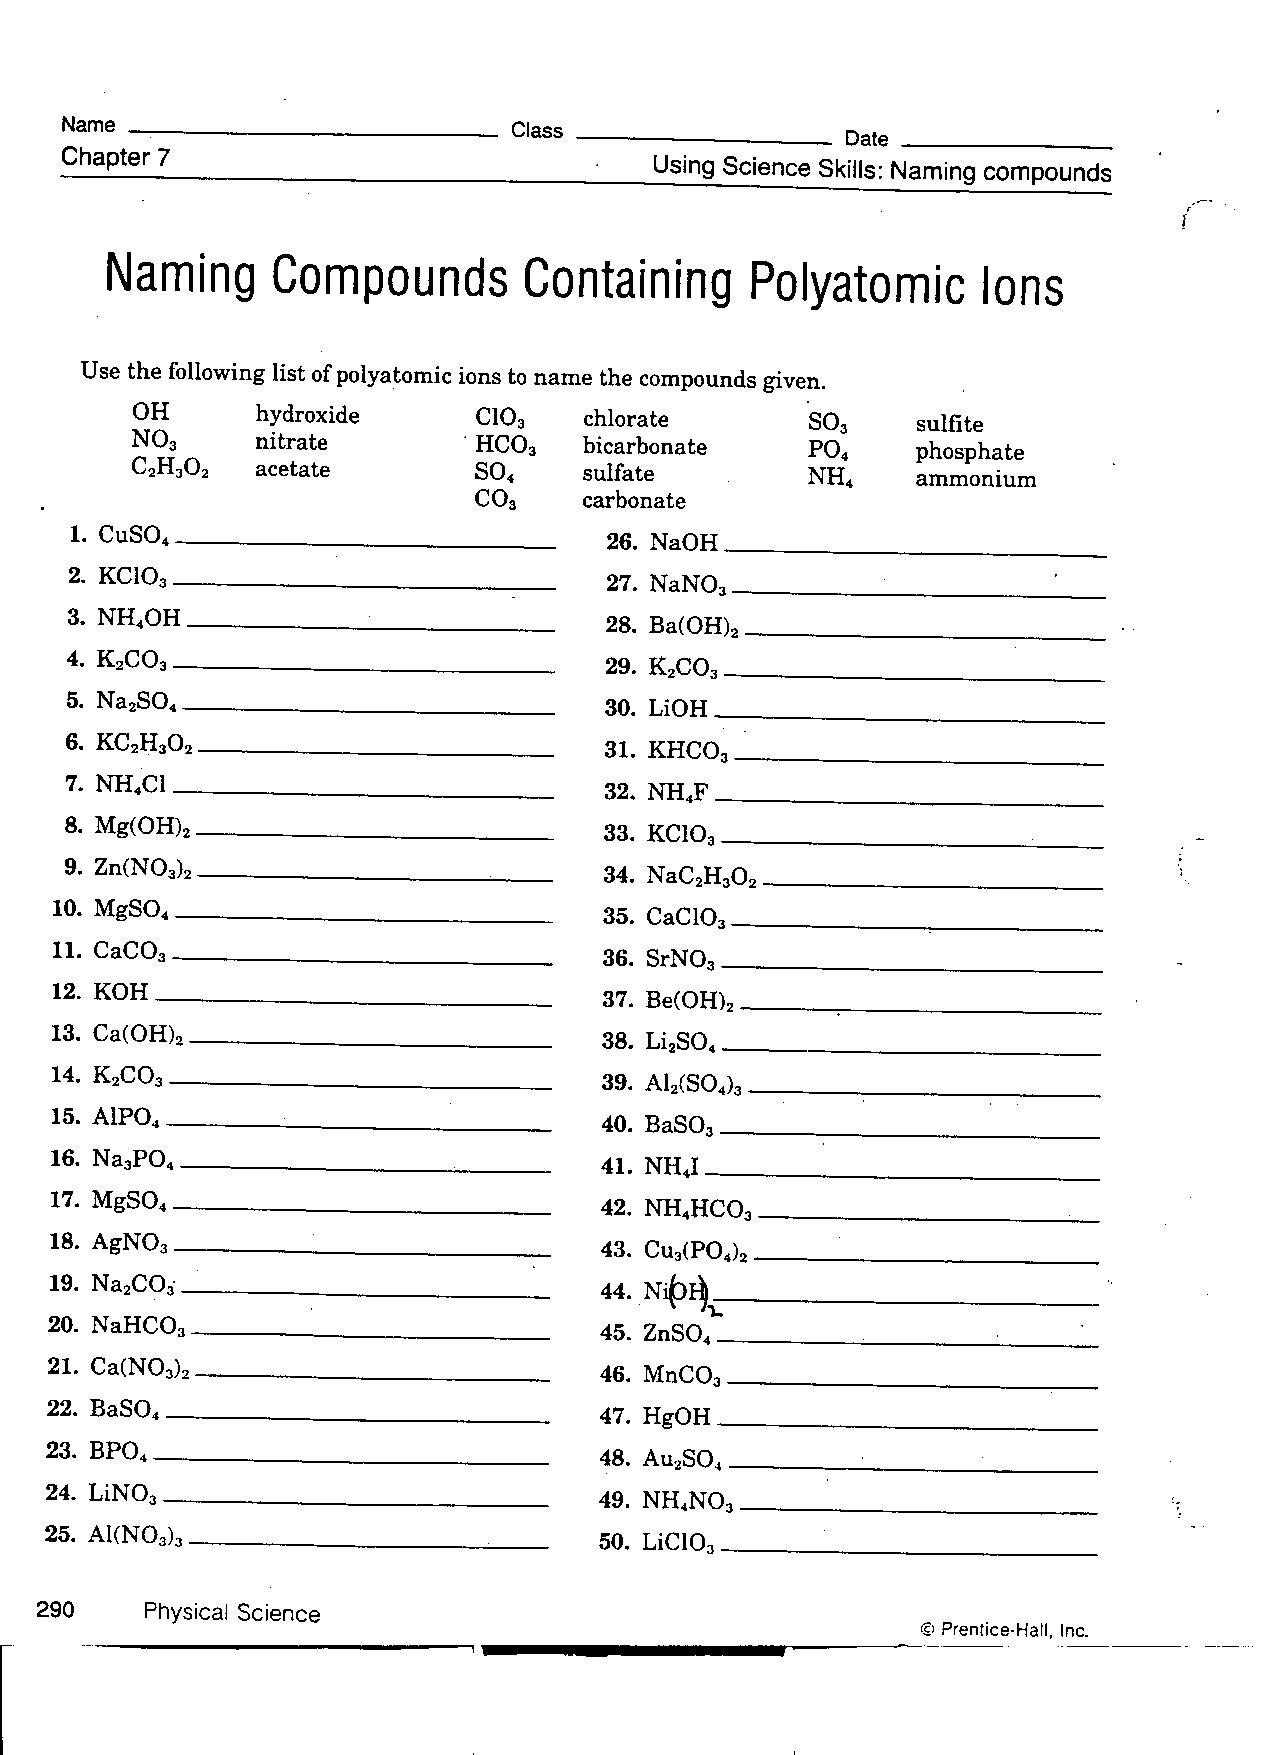 Naming Polyatomic Ions Worksheet together with Naming Pounds Worksheet Answers Fresh Writing Ionic Pounds